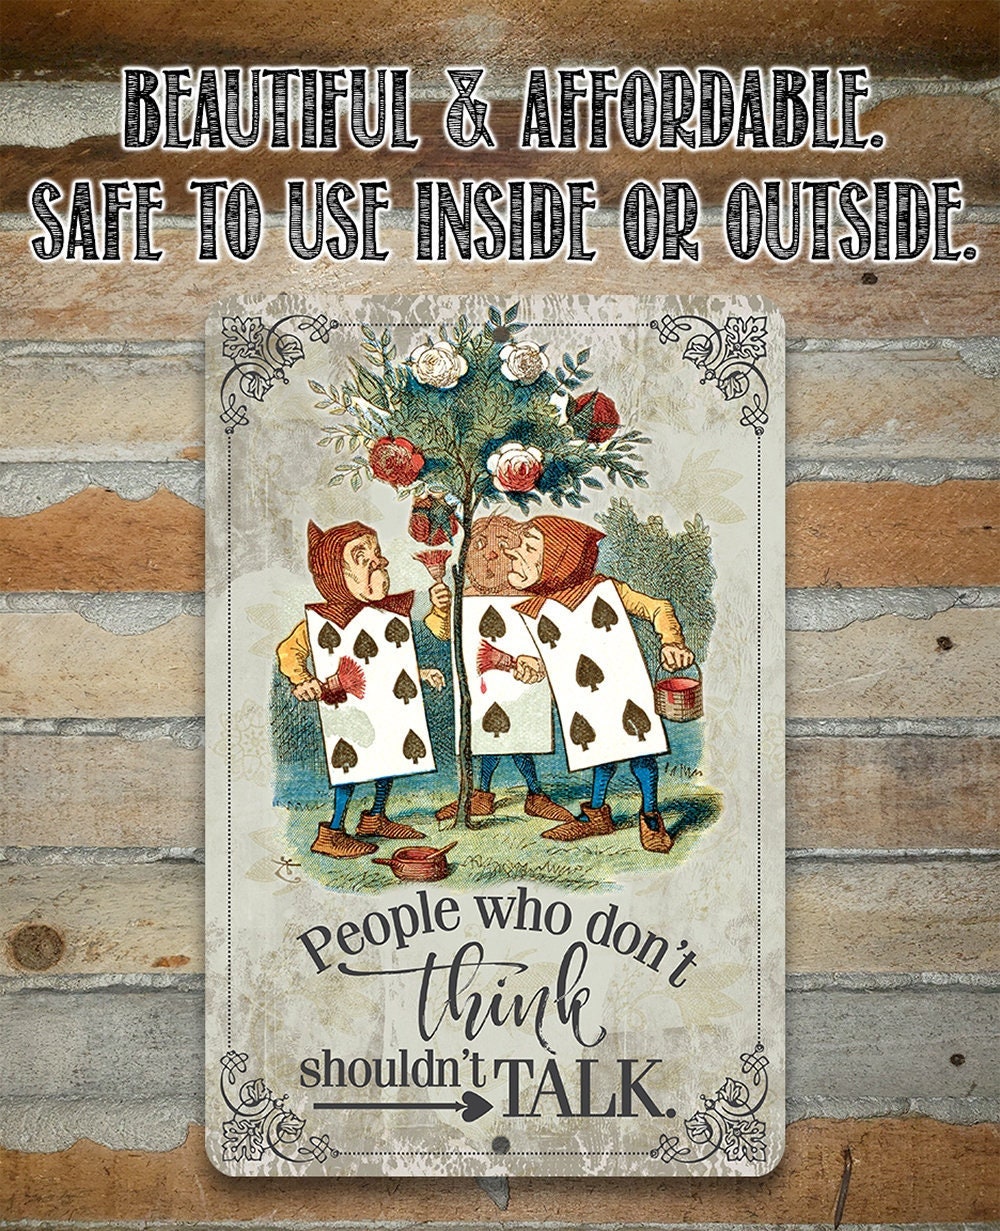 Alice in Wonderland - People Who Don't Think Shouldn't Talk - 8" x 12" or 12" x 18" Aluminum Tin Awesome Metal Poster Lone Star Art 